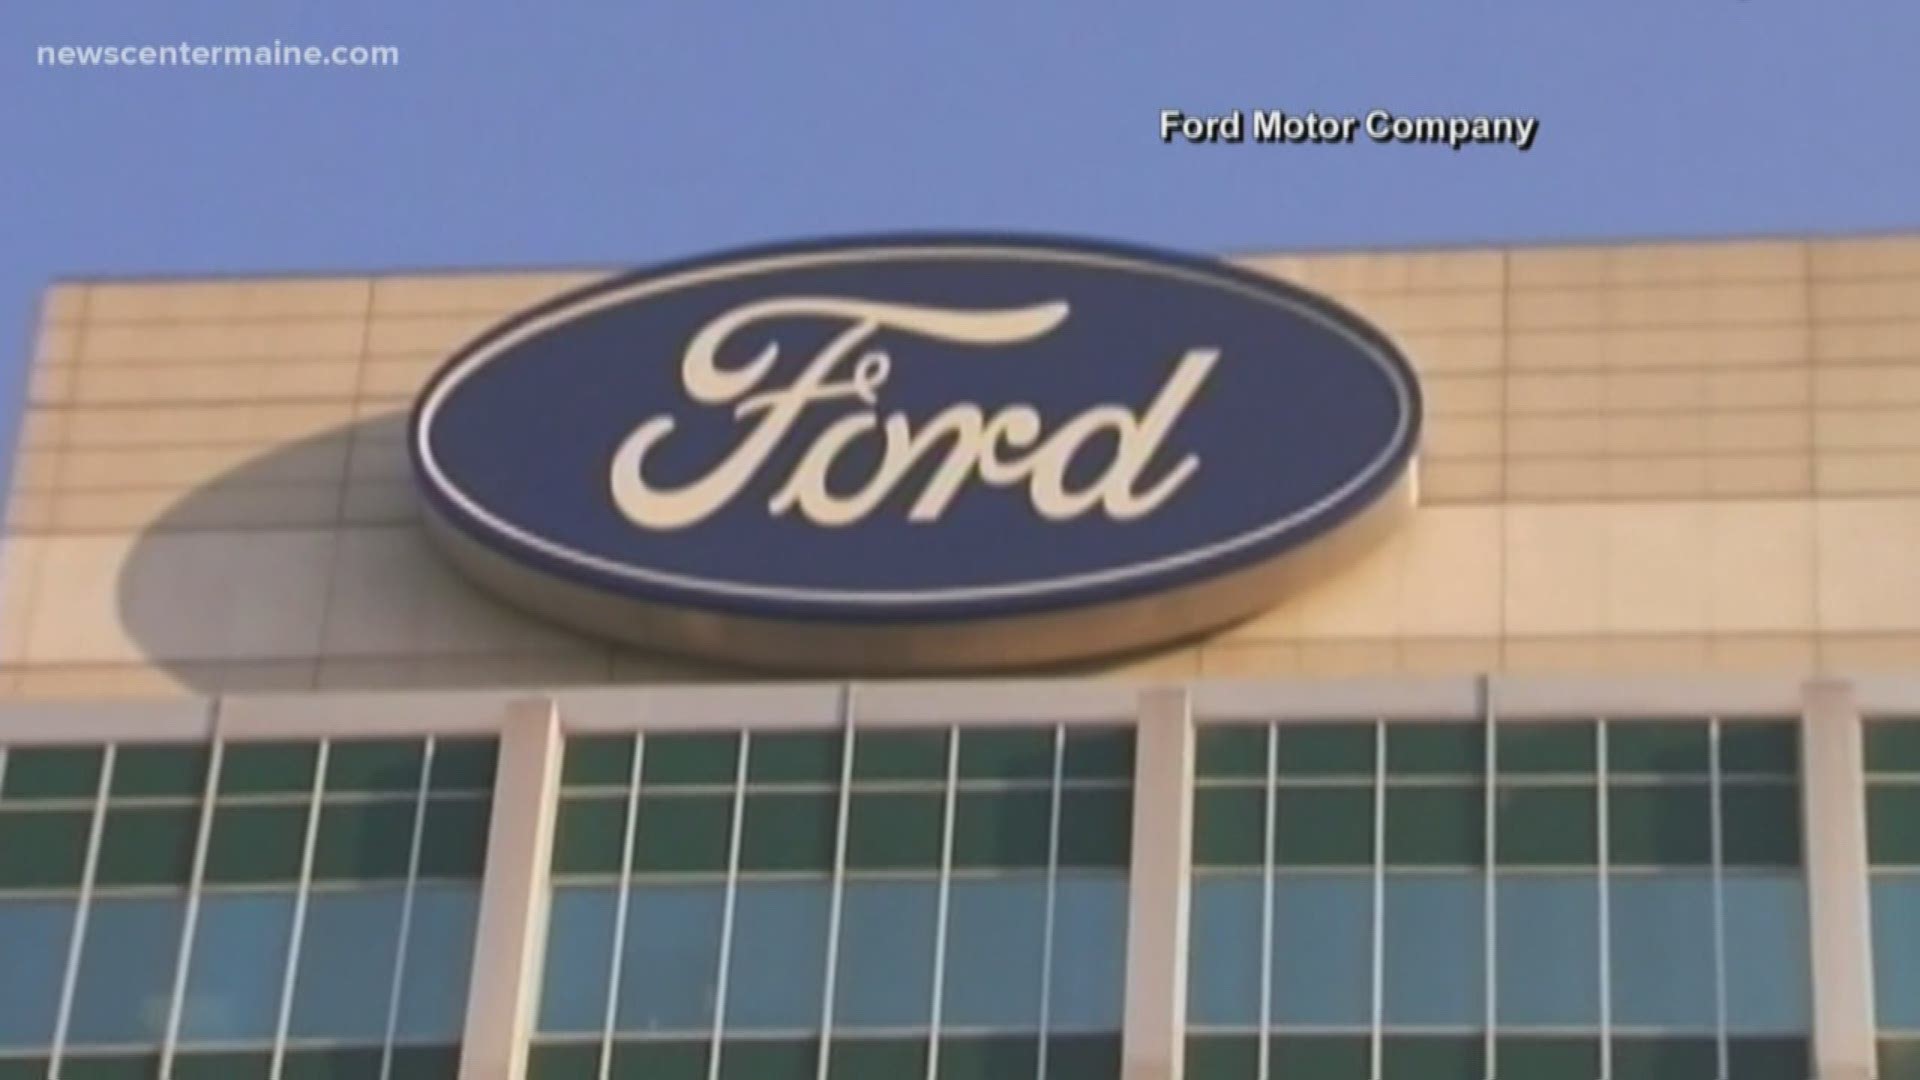 Ford recalls 953,000 vehicles to replace air bag inflators